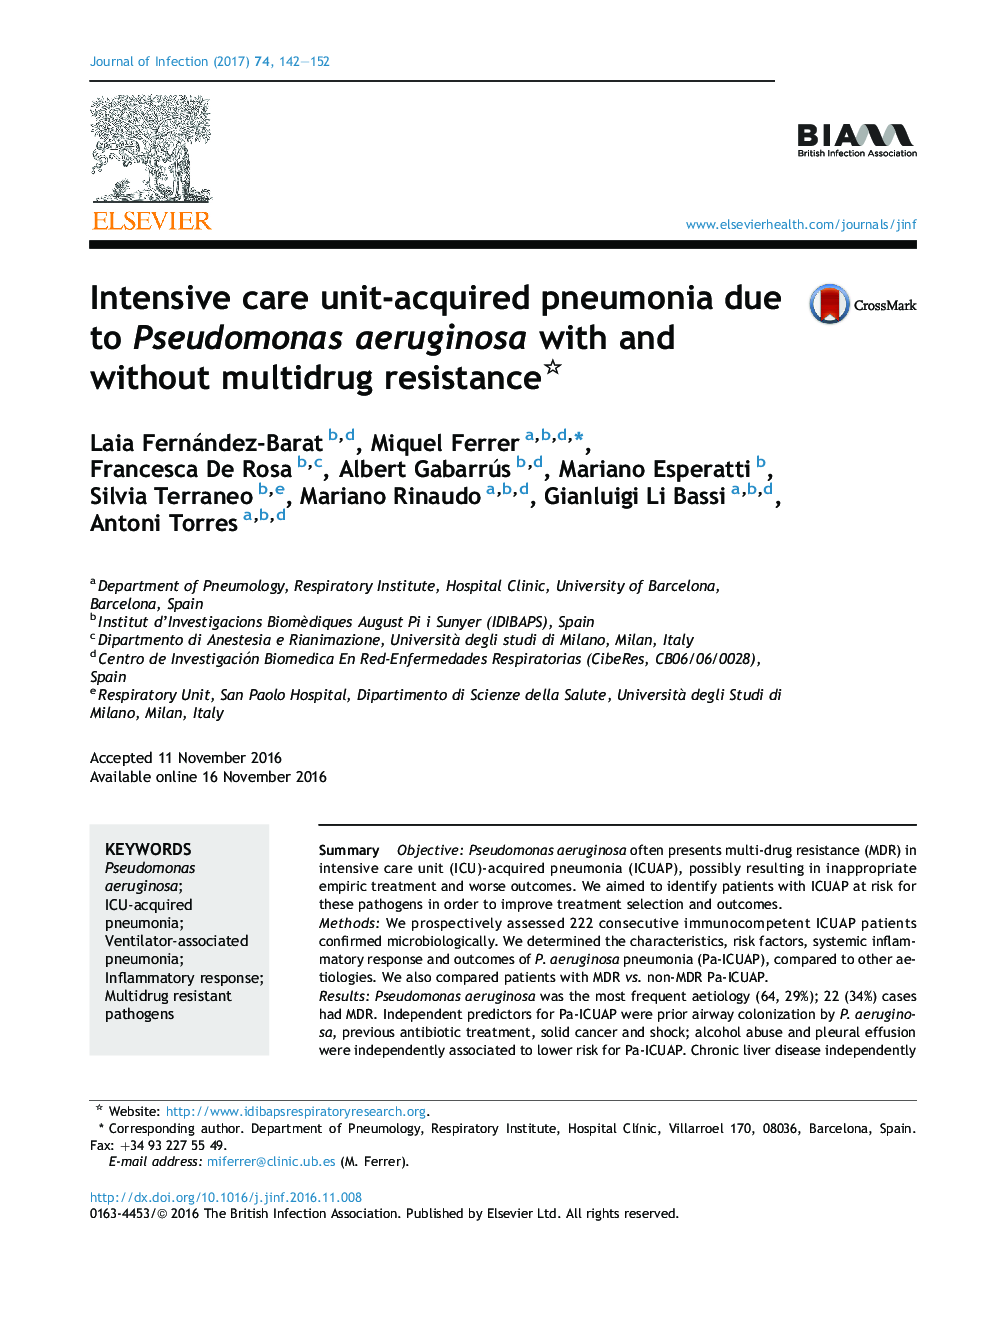 Intensive care unit-acquired pneumonia due to Pseudomonas aeruginosa with and without multidrug resistance